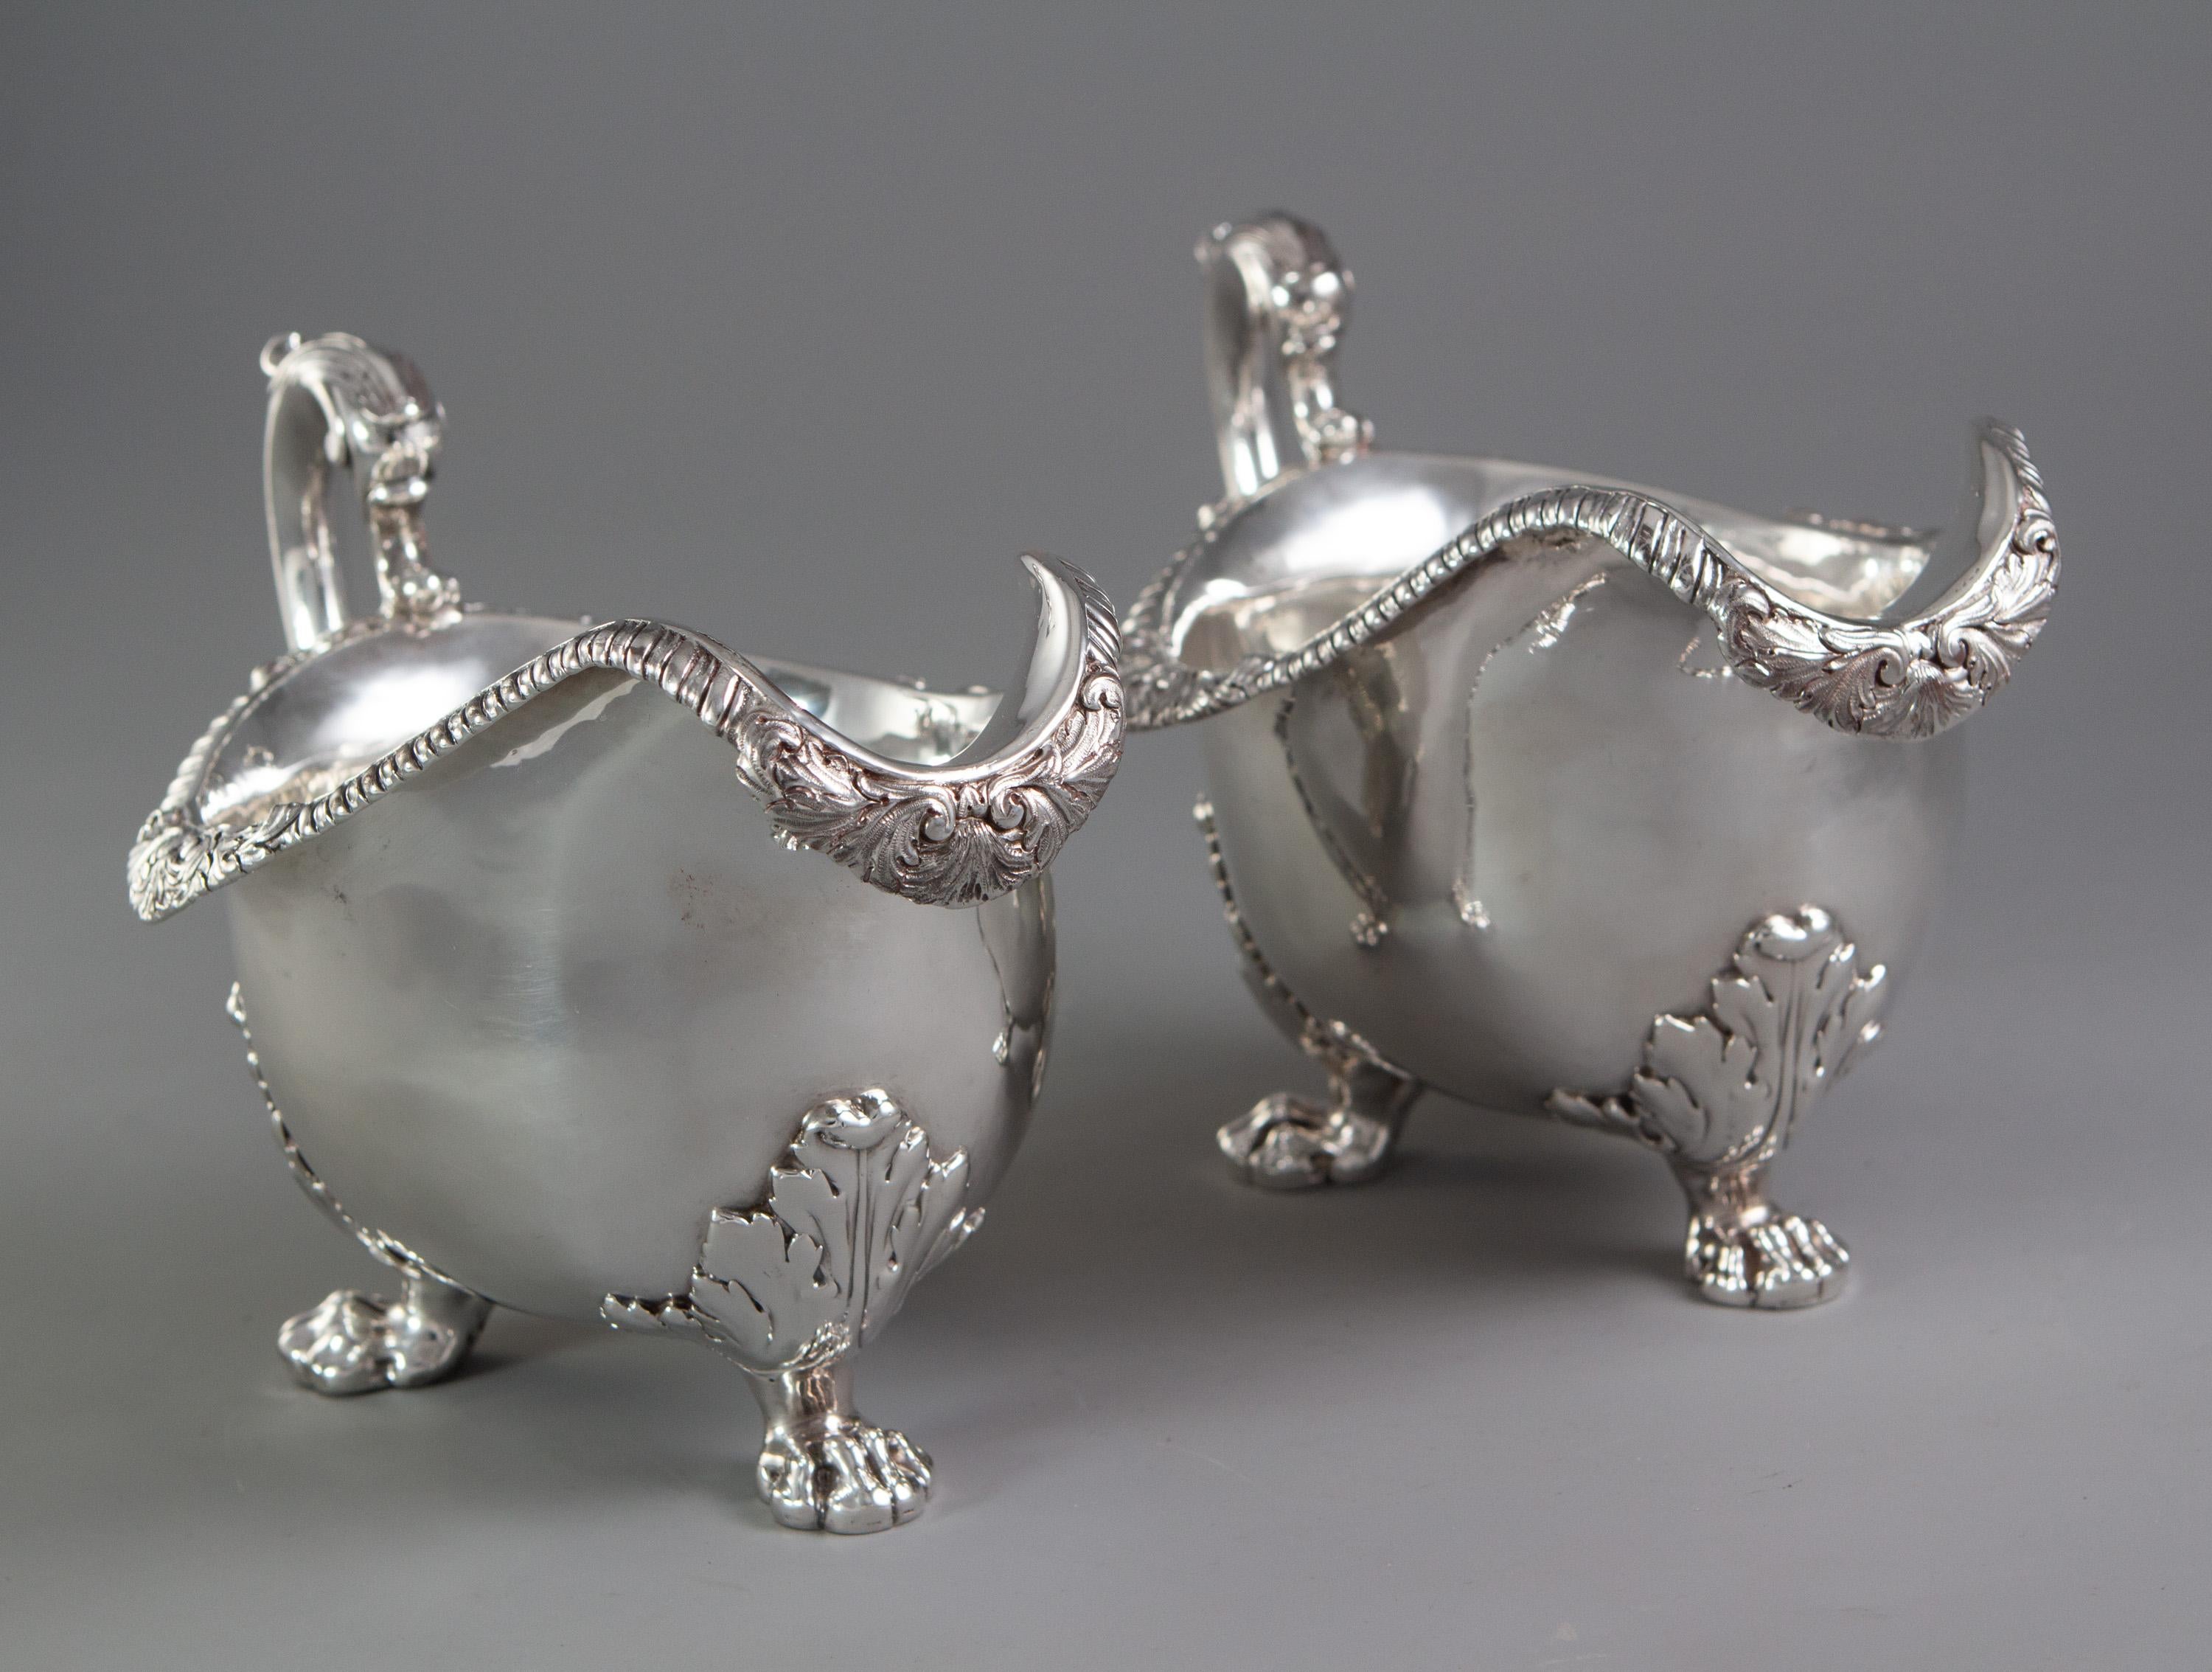 George III Pair of George IV Silver Sauce Boats, London 1820 by Paul Storr